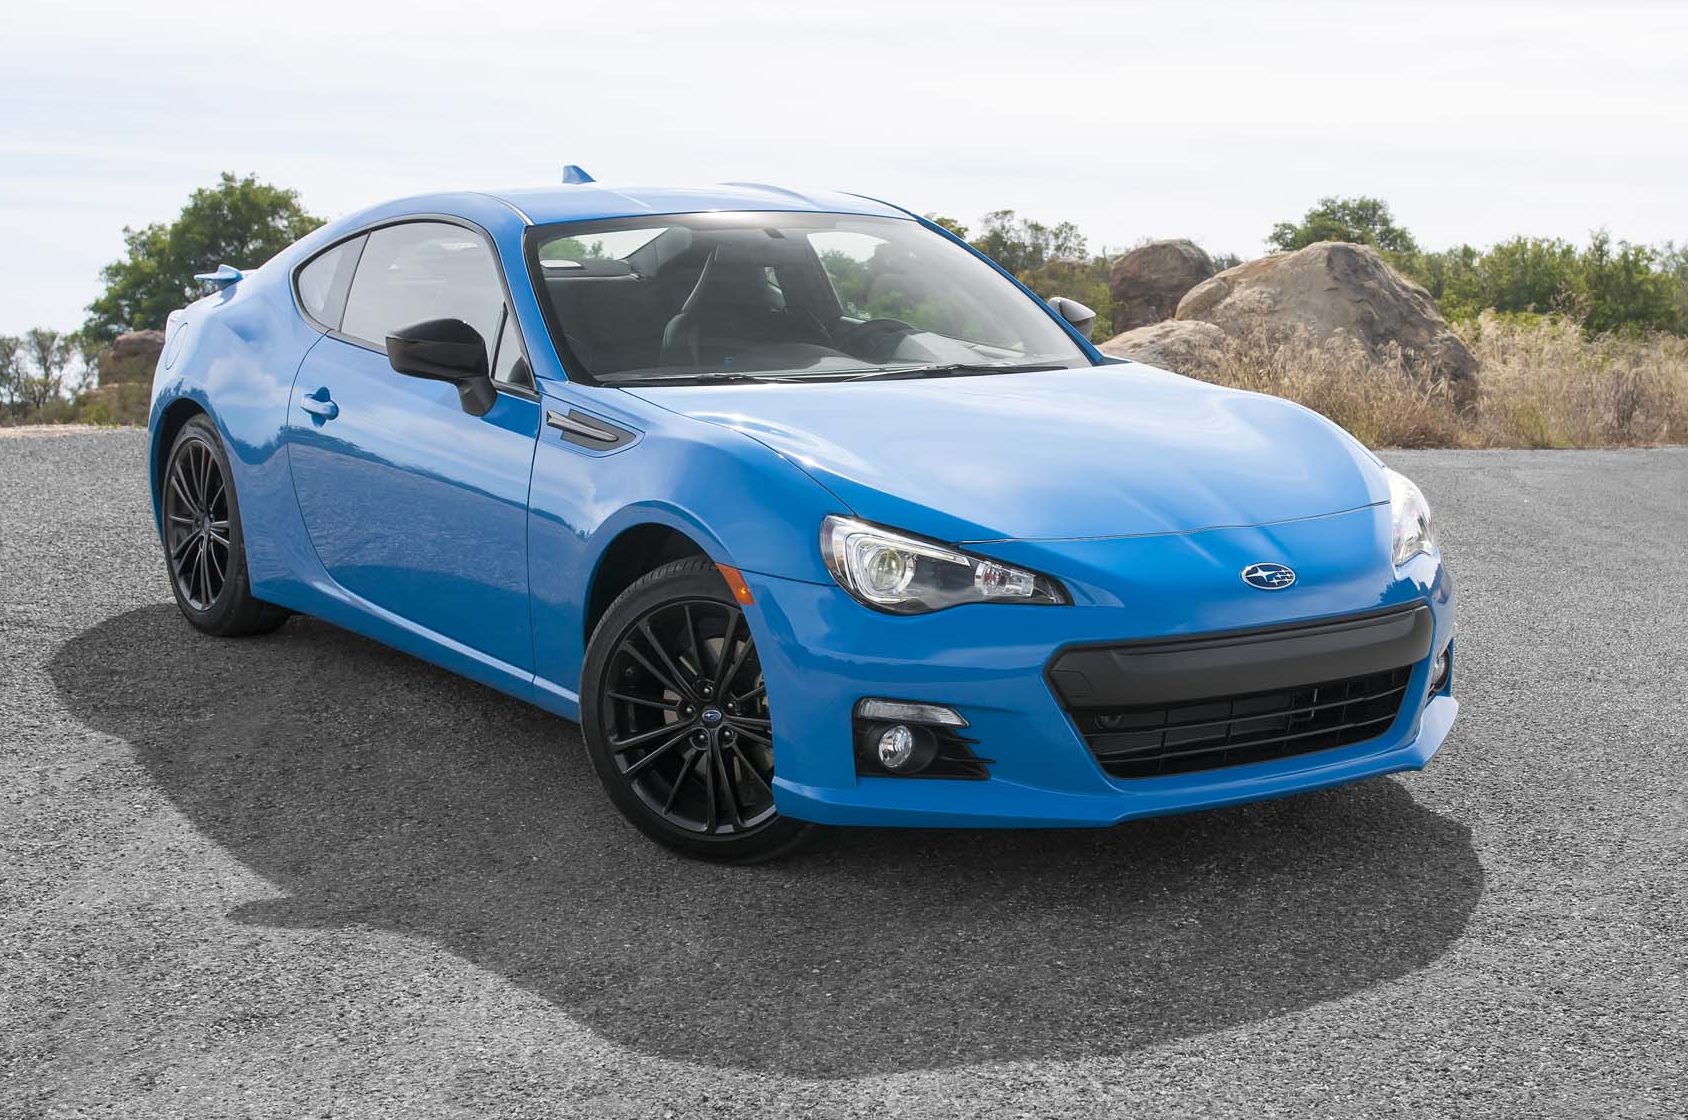 2016 Subaru BRZ Series HyperBlue Update 5: Why We Like This Special-Edition  Color